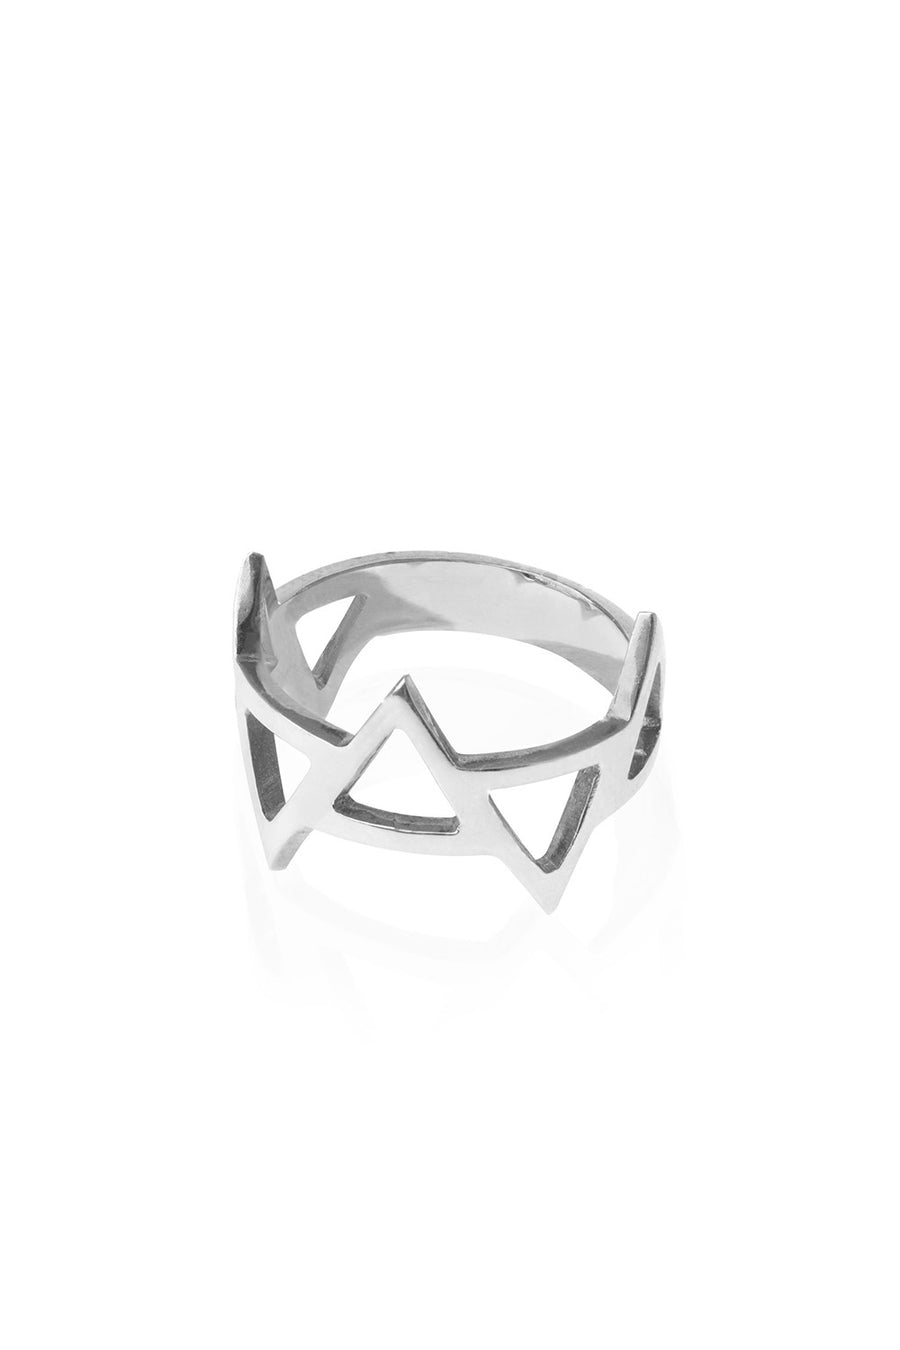 Wholesale - Ladder of Life, Silver Ring